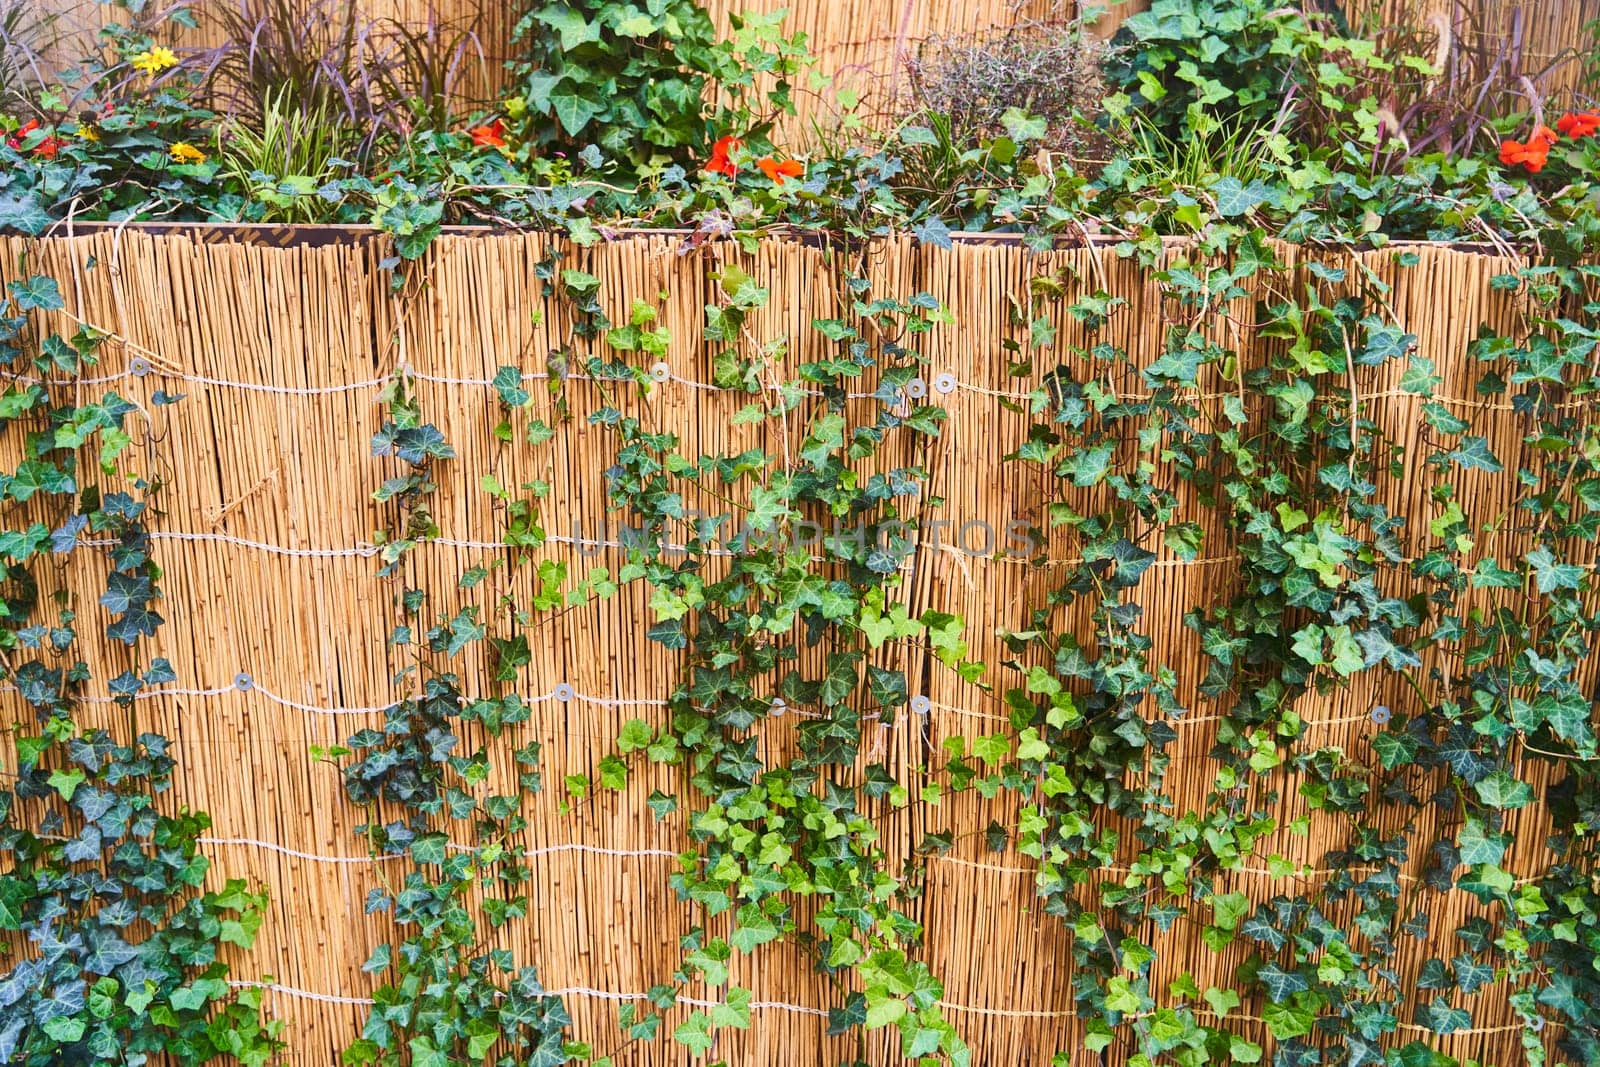 A close up of a hardwood fence with ivy, an annual plant, growing on it. The ivy adds a lush green contrast to the wood stain, creating a beautiful landscape